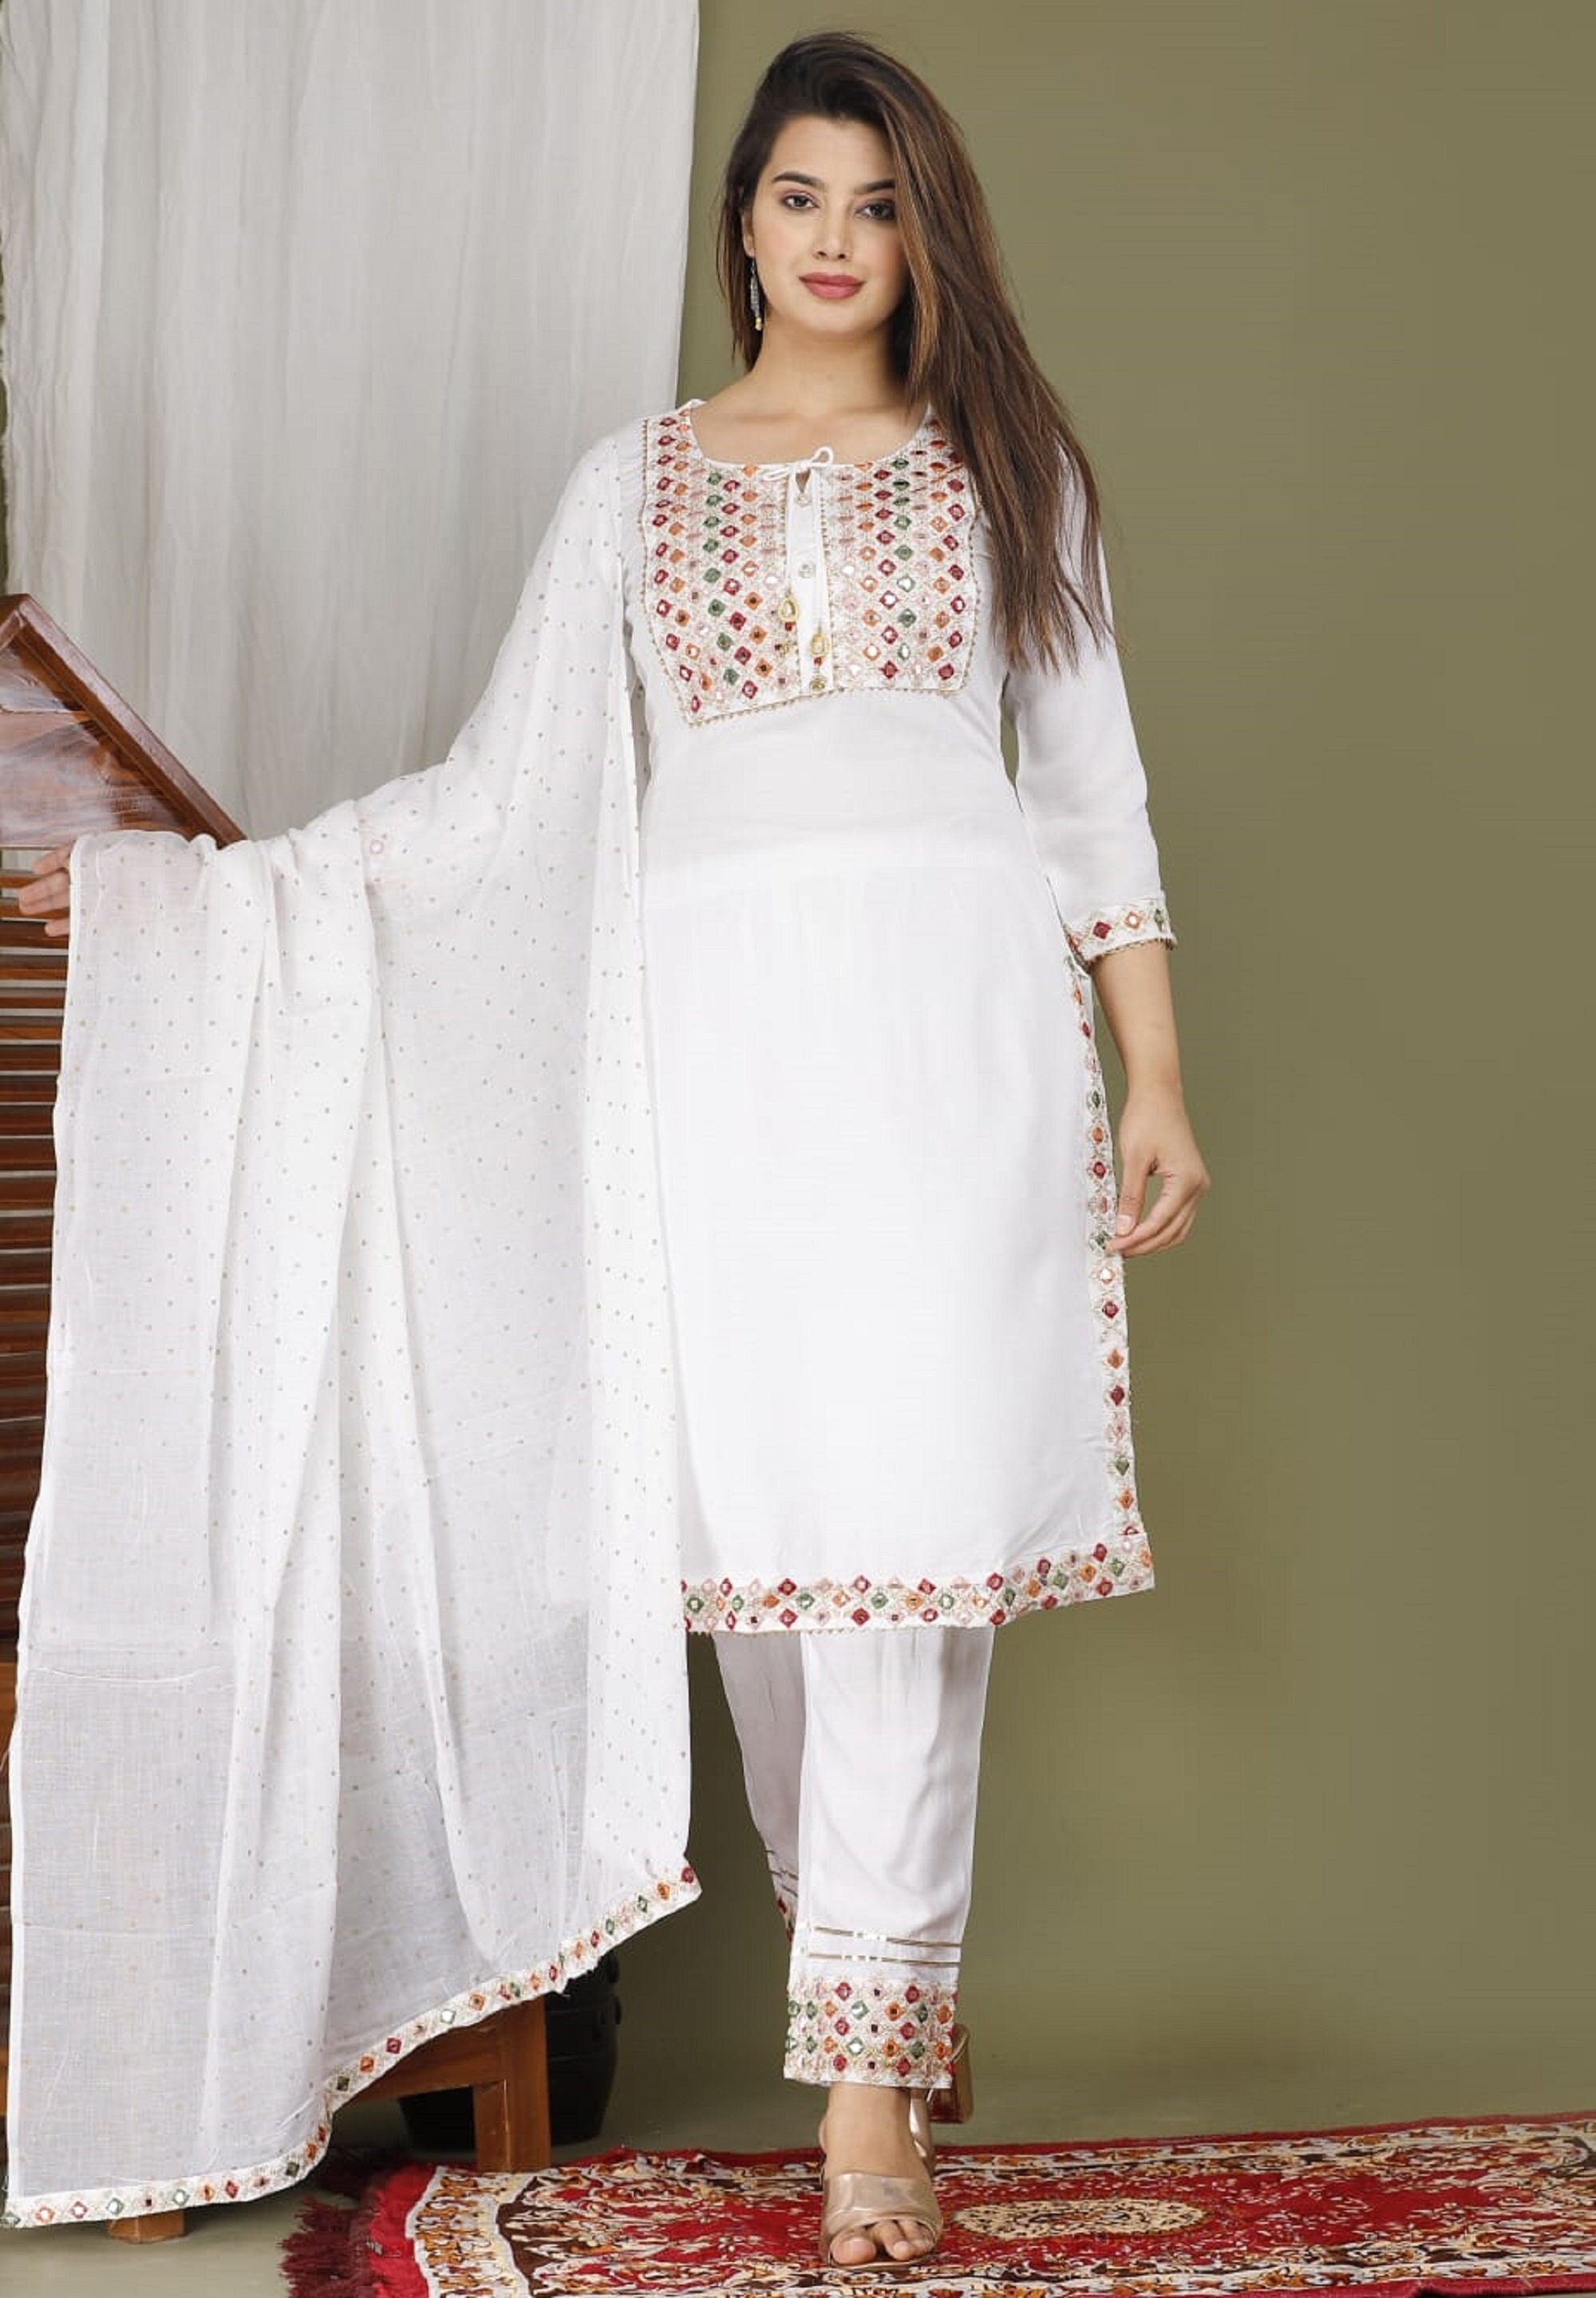 Complete Stitched. Indian Women Designer Ankle Length Embroidrey Work White  Kurti Pant With Stylish Dupatta Dress. Wedding Partywear Dress. -   Canada